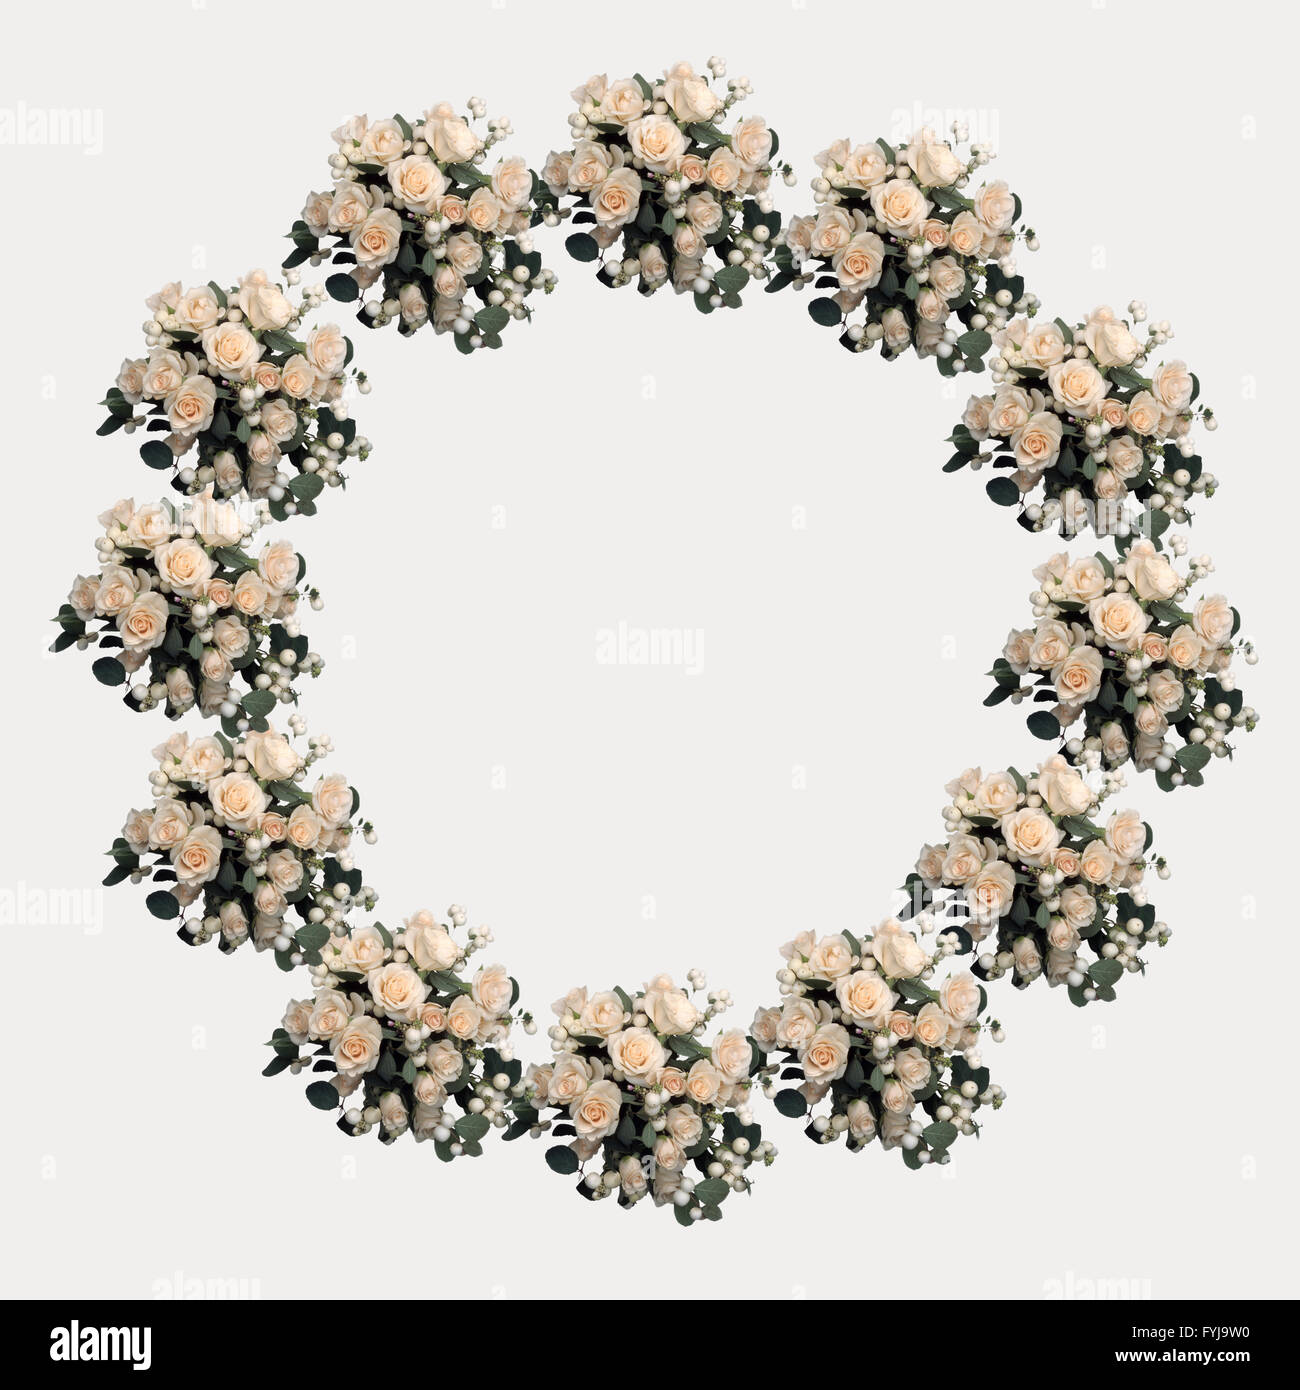 Floral wreath Stock Photo